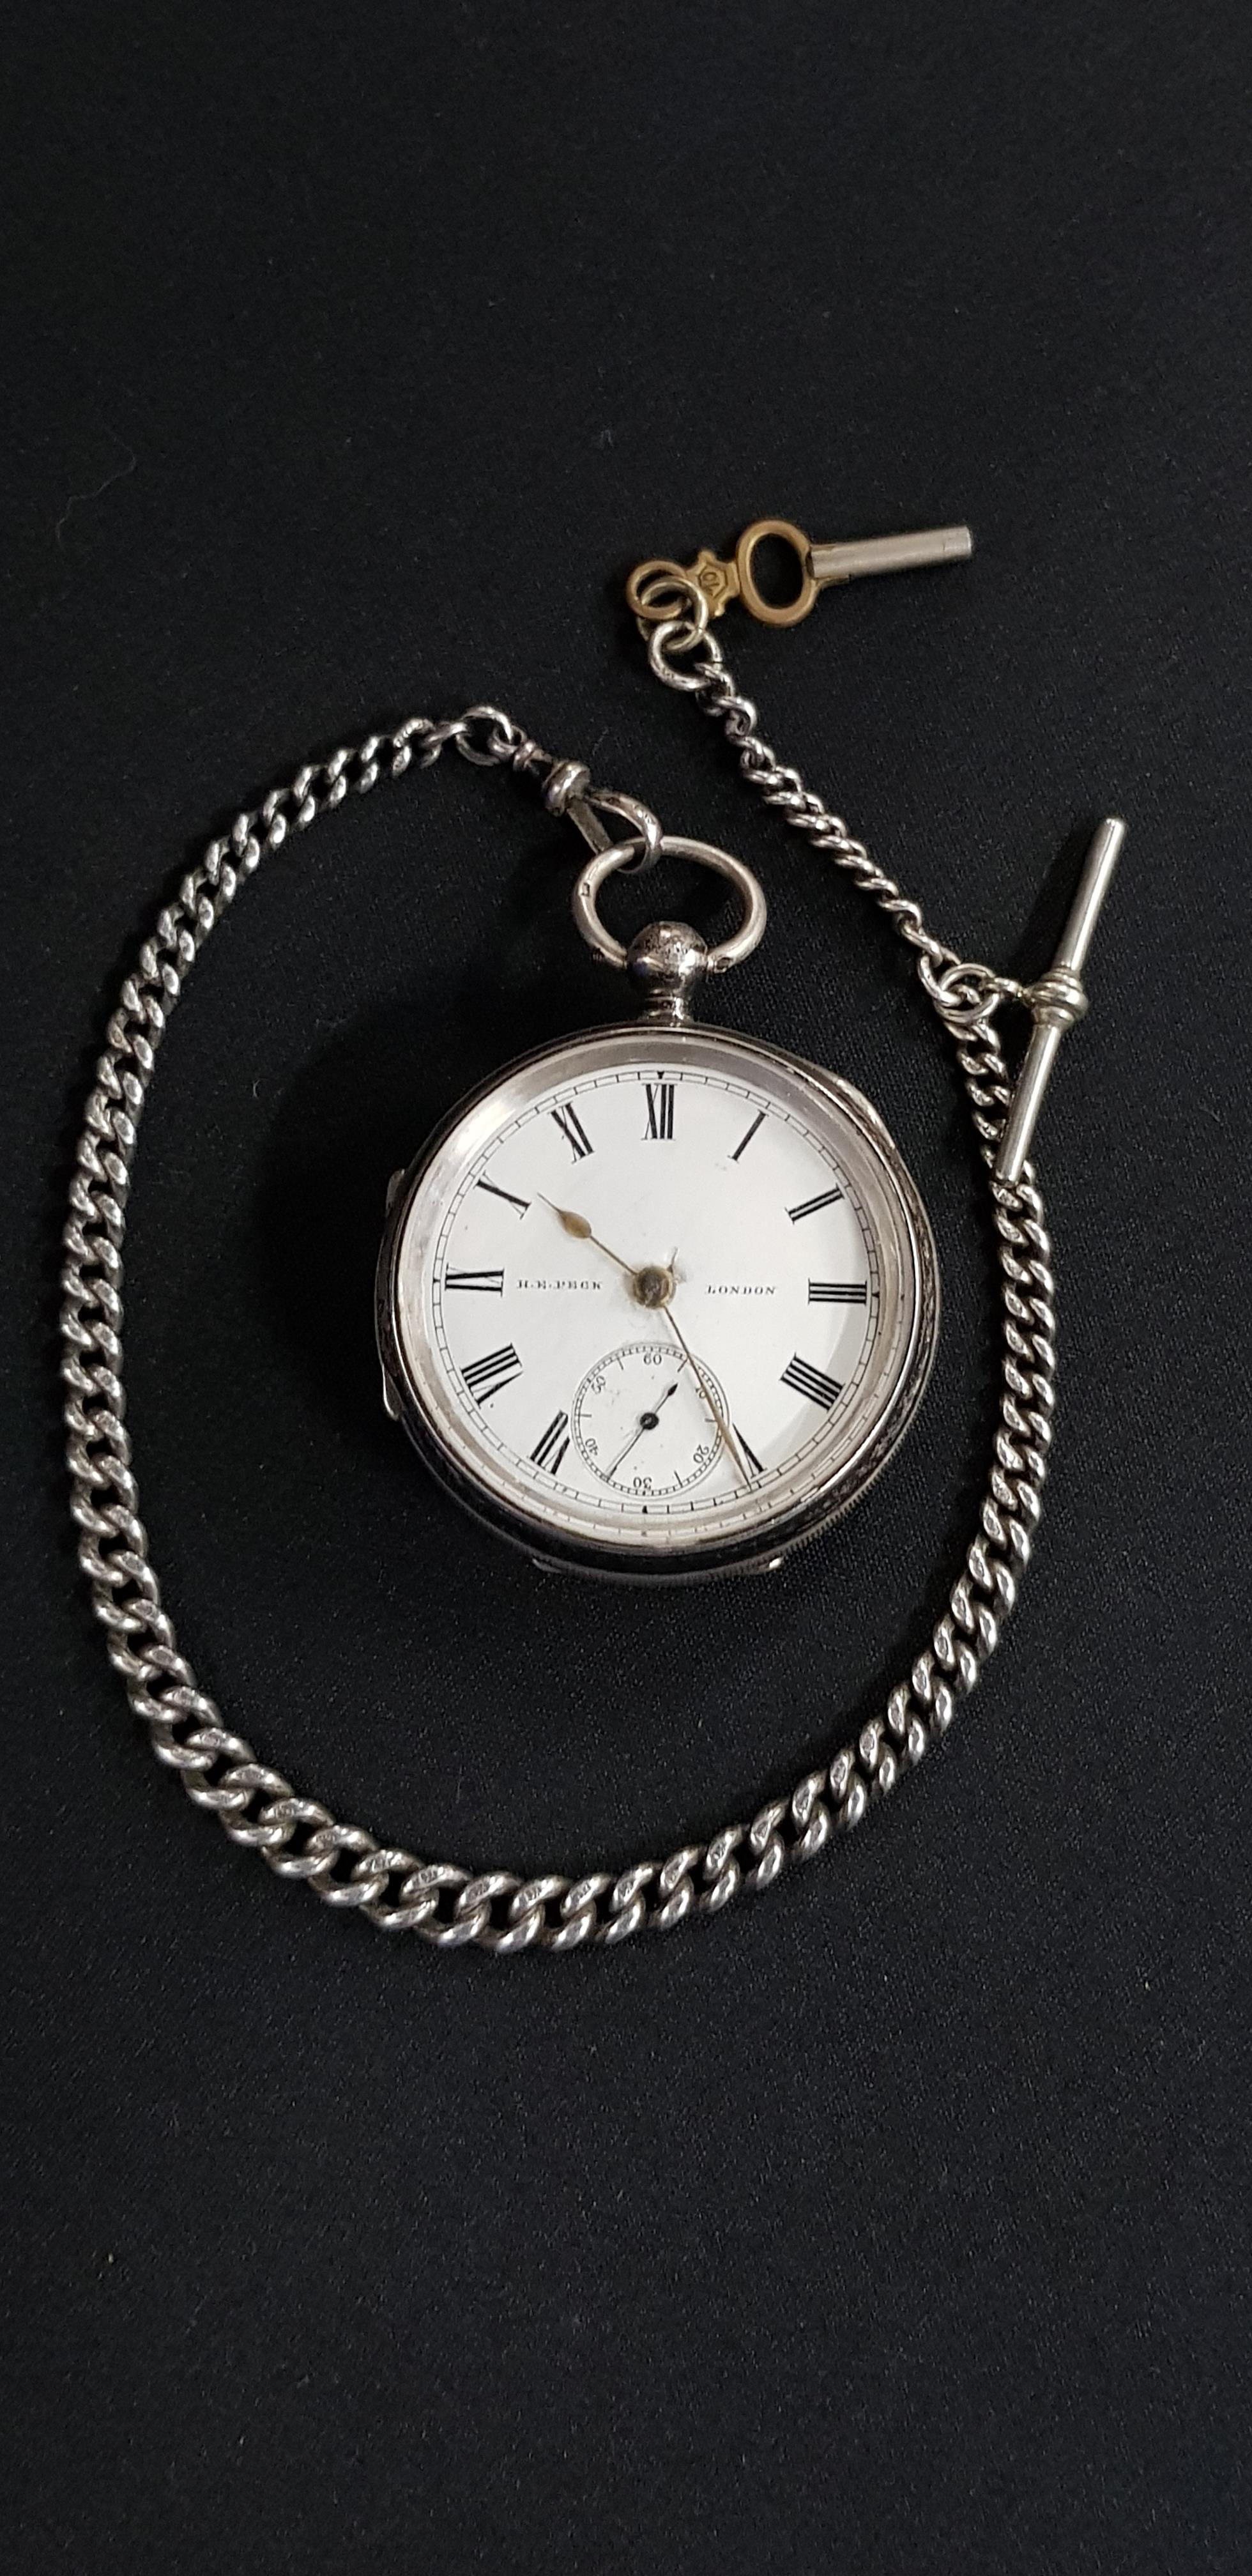 ANTIQUE SILVER POCKET WATCH ON ANTIQUE SILVER WATCH CHAIN WITH KEY